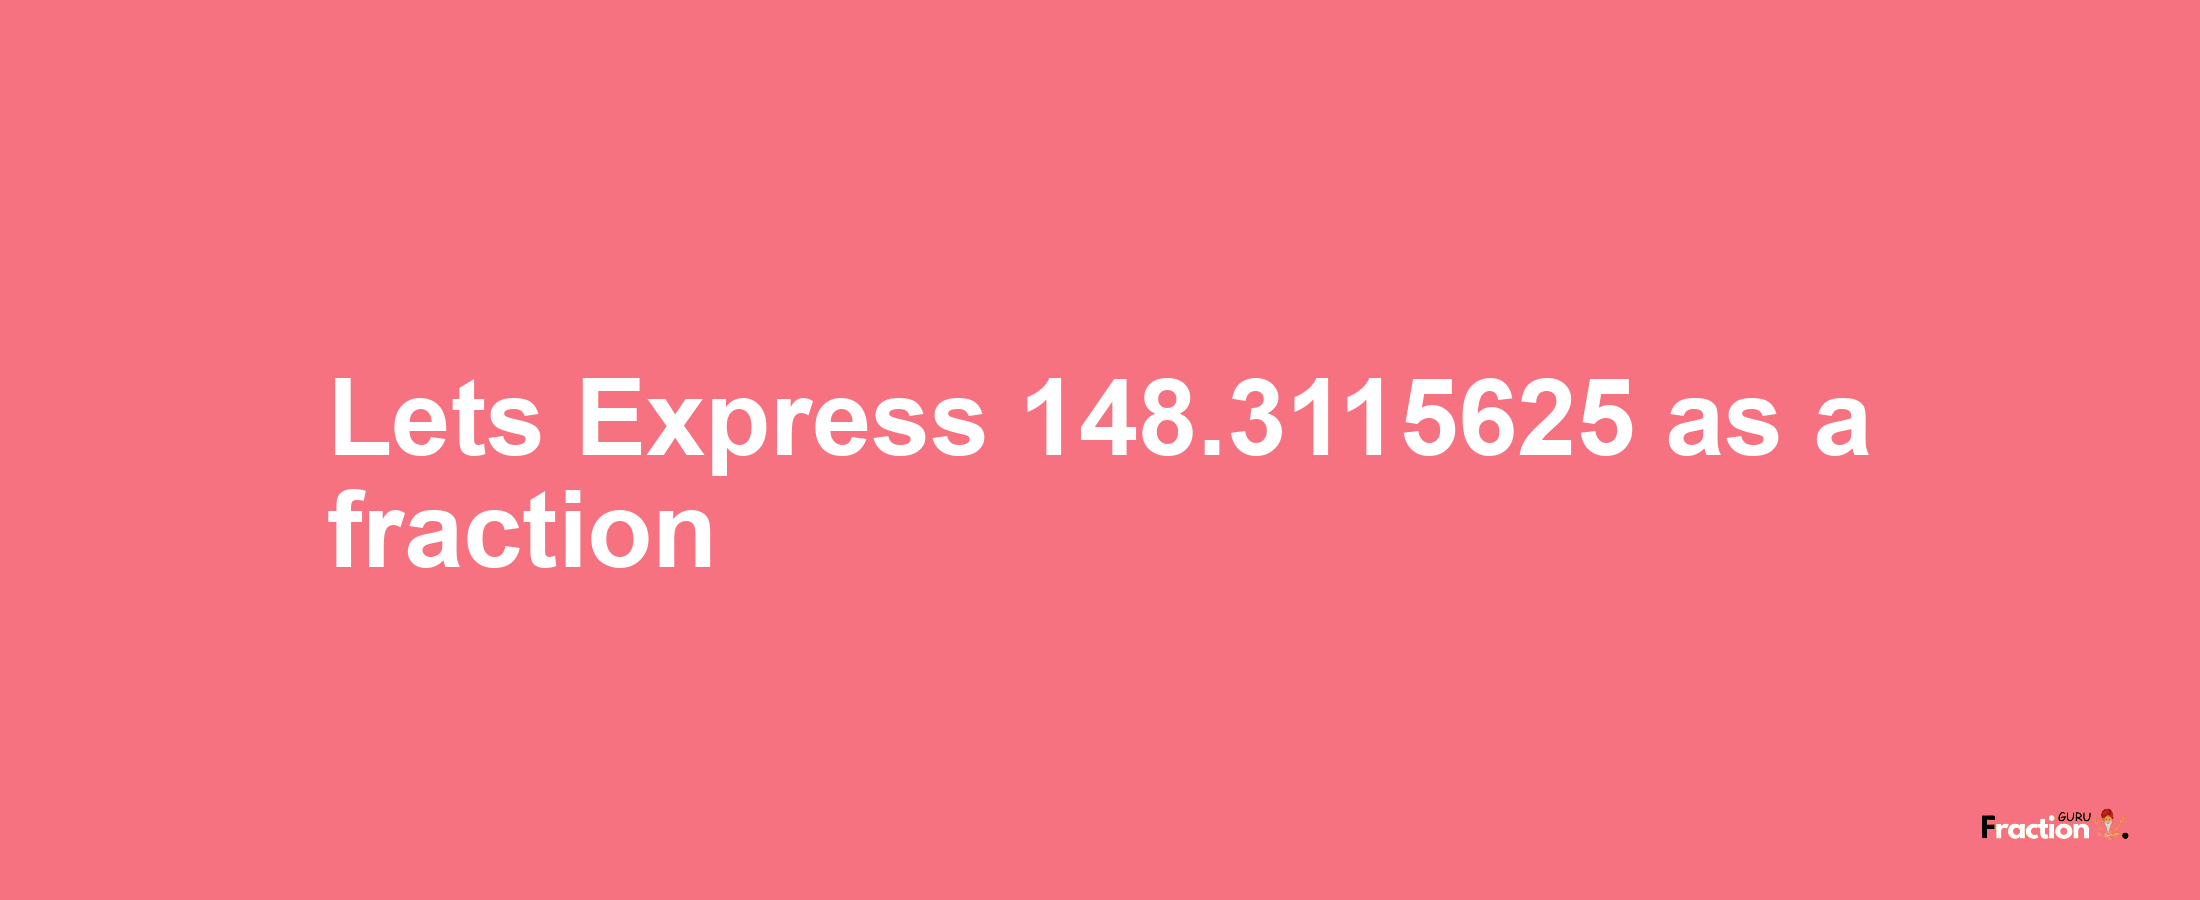 Lets Express 148.3115625 as afraction